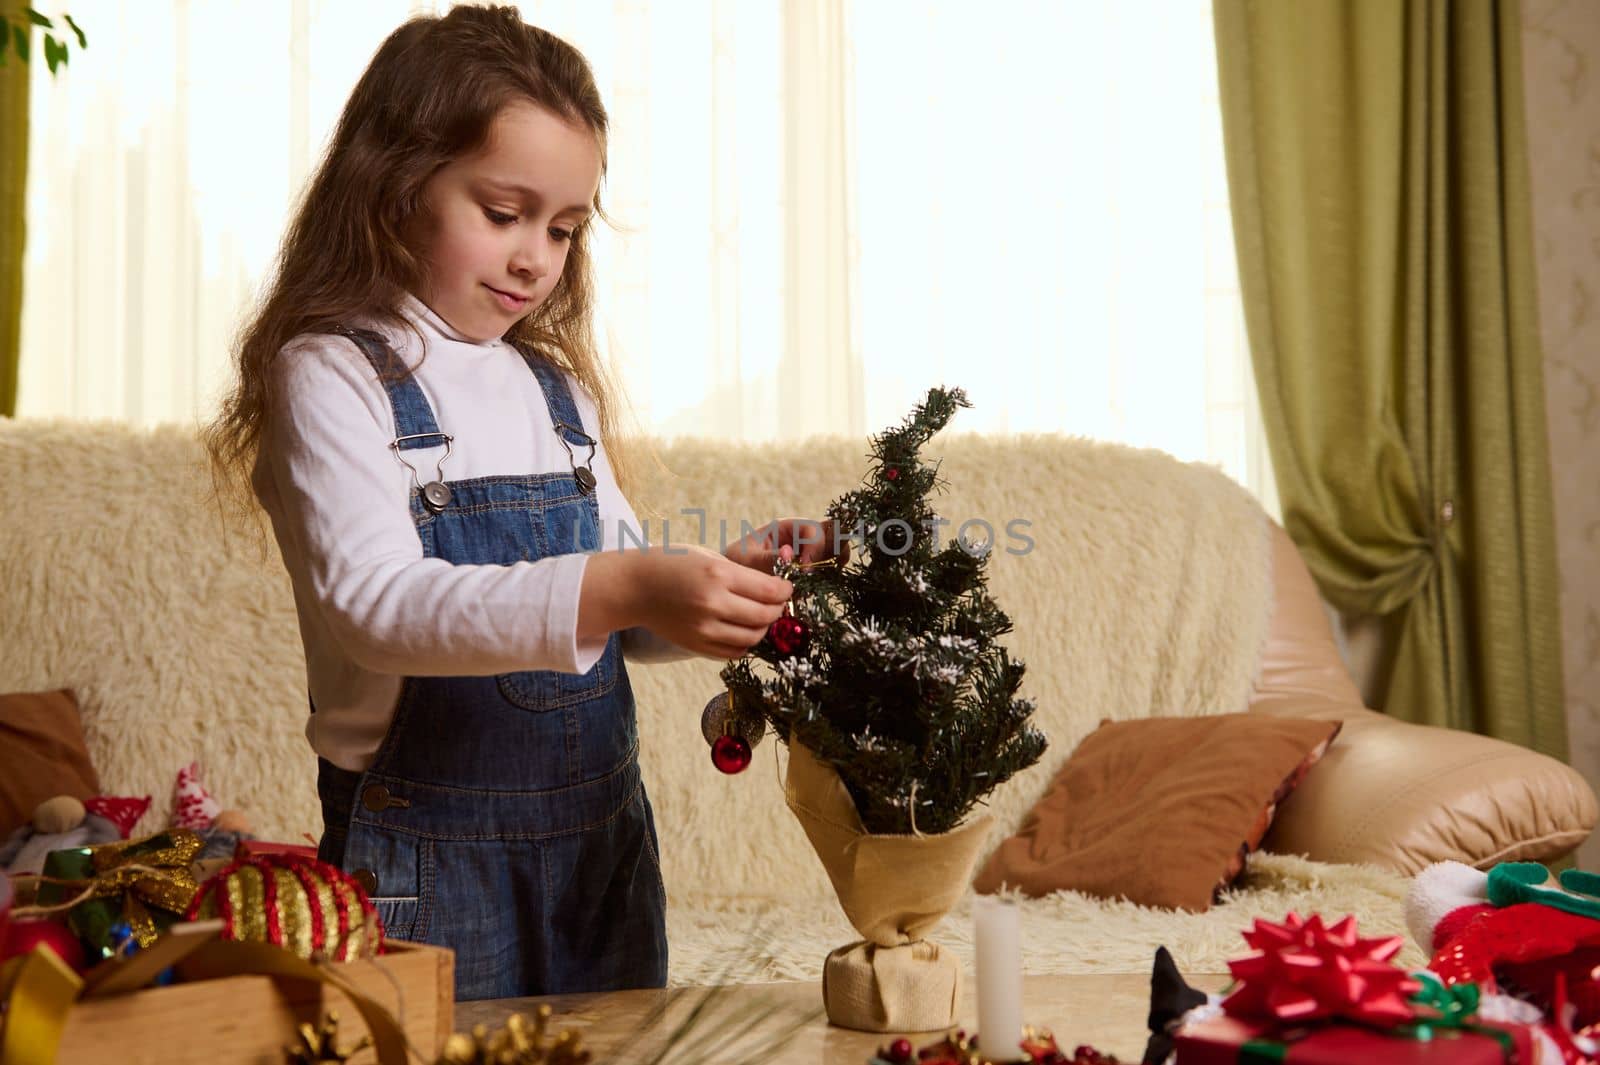 Beautiful little girl hanging shiny balls and toys on a small Christmas tree while decorating home for winter holidays by artgf